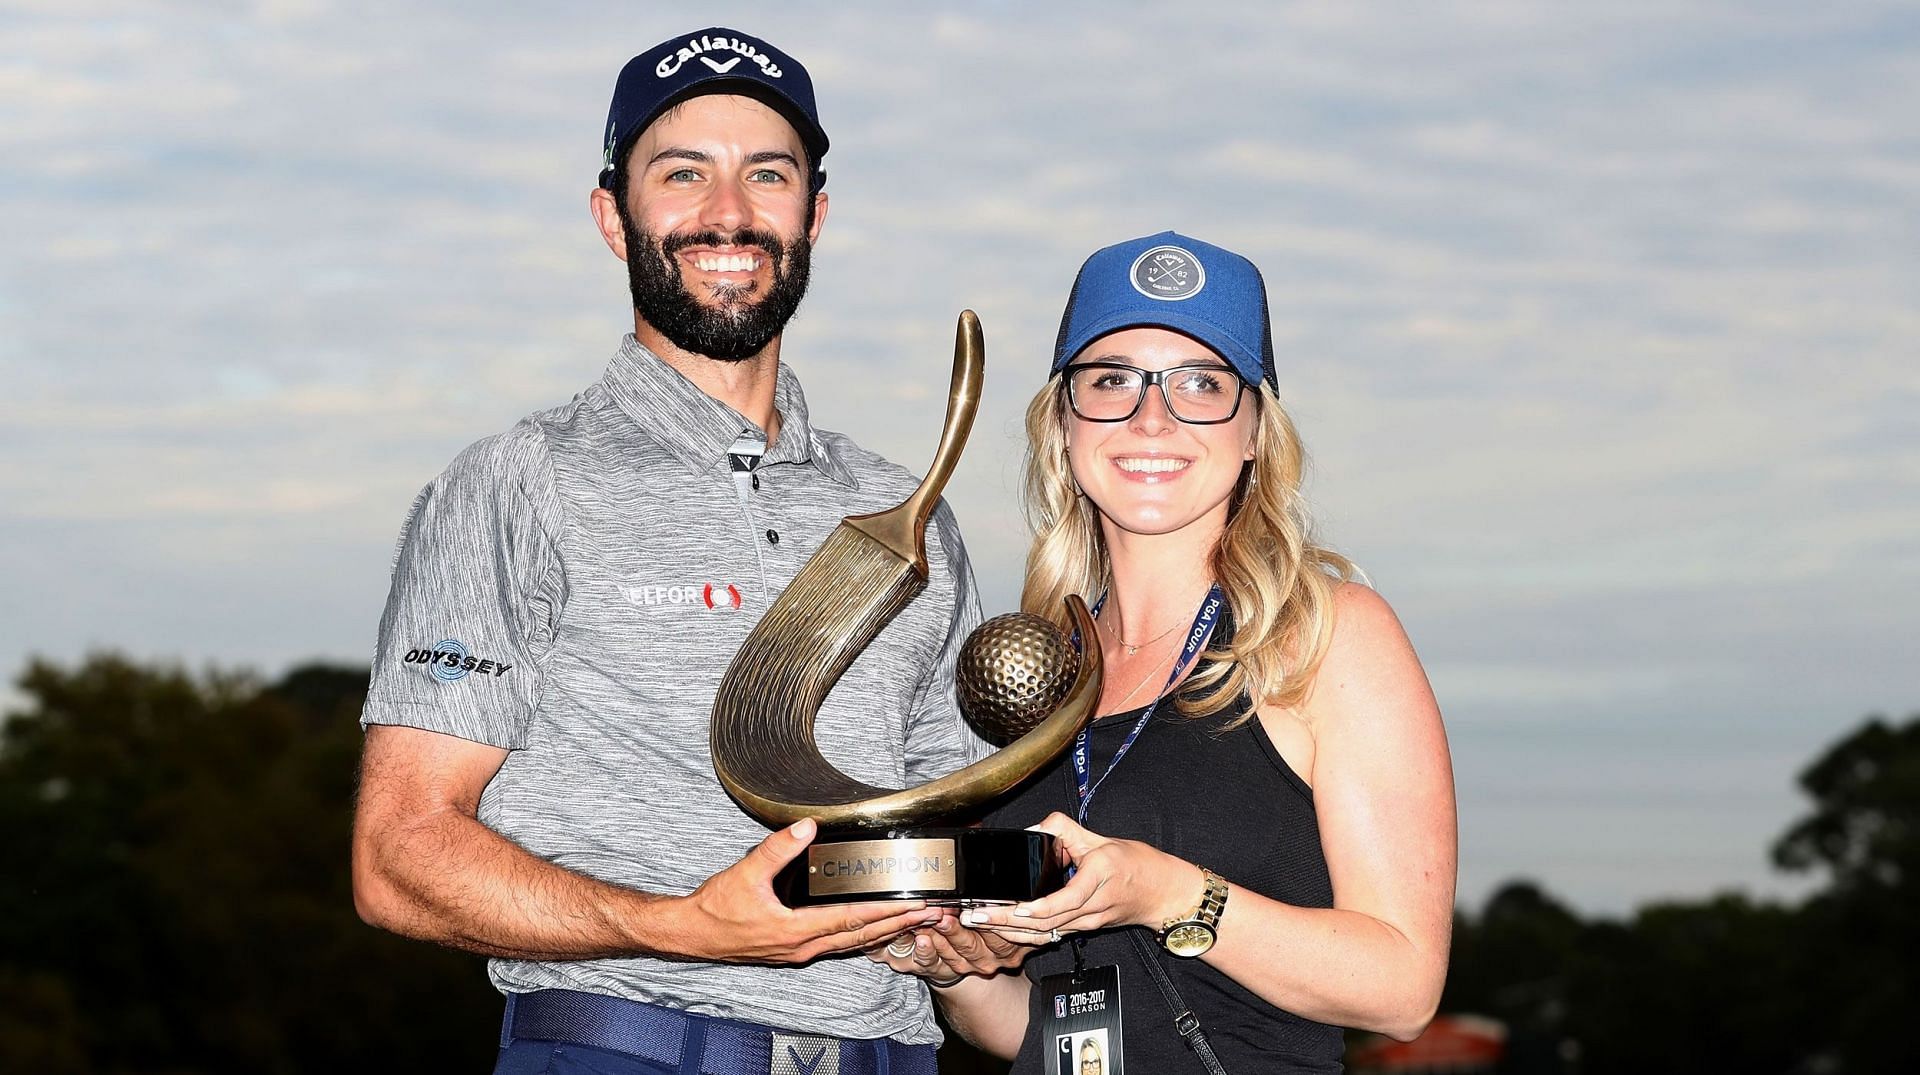 Adam Hadwin and his wife Jessica Hadwin pose with the 2017 Valspar Championship trophy